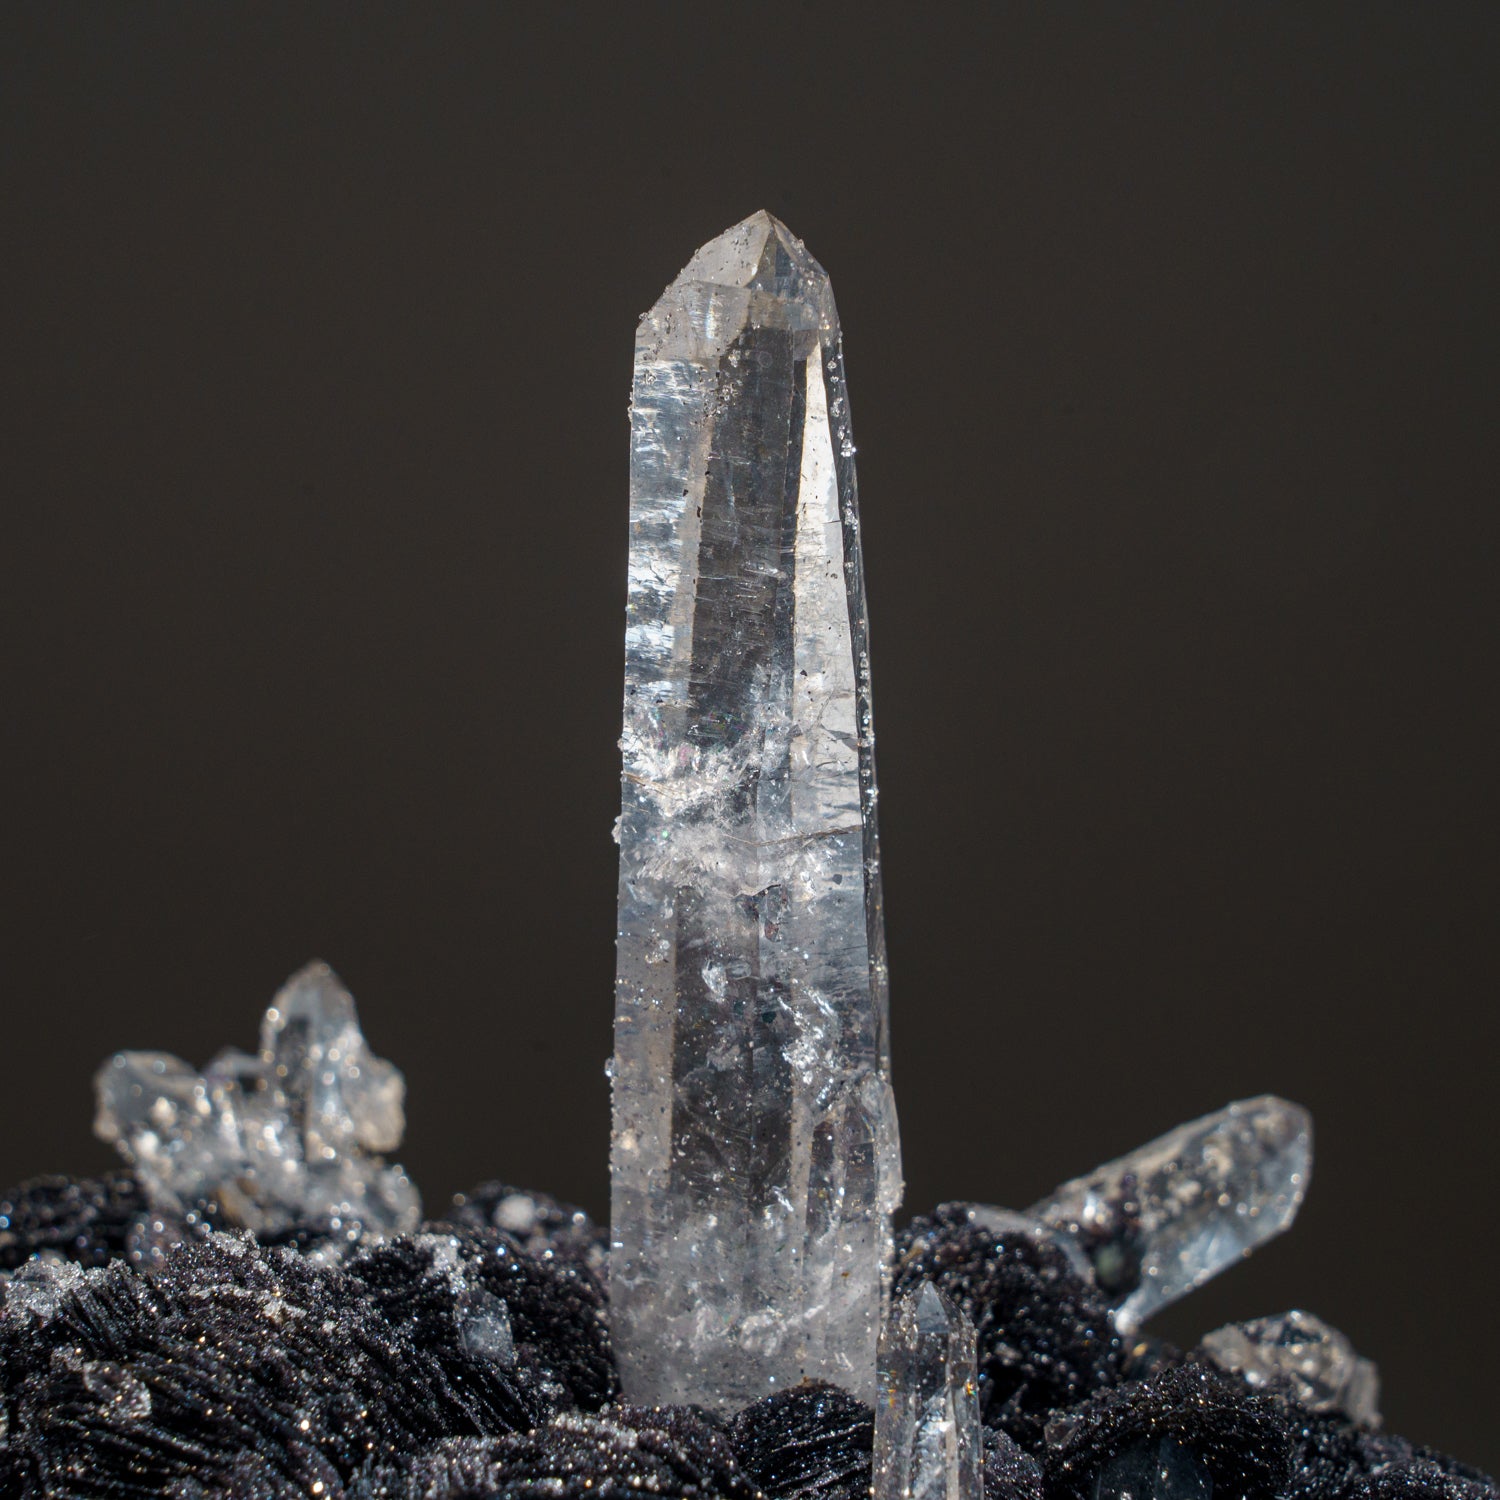 Quartz with Hematite Rosette from Lechang Mine, Guangdong Province, China